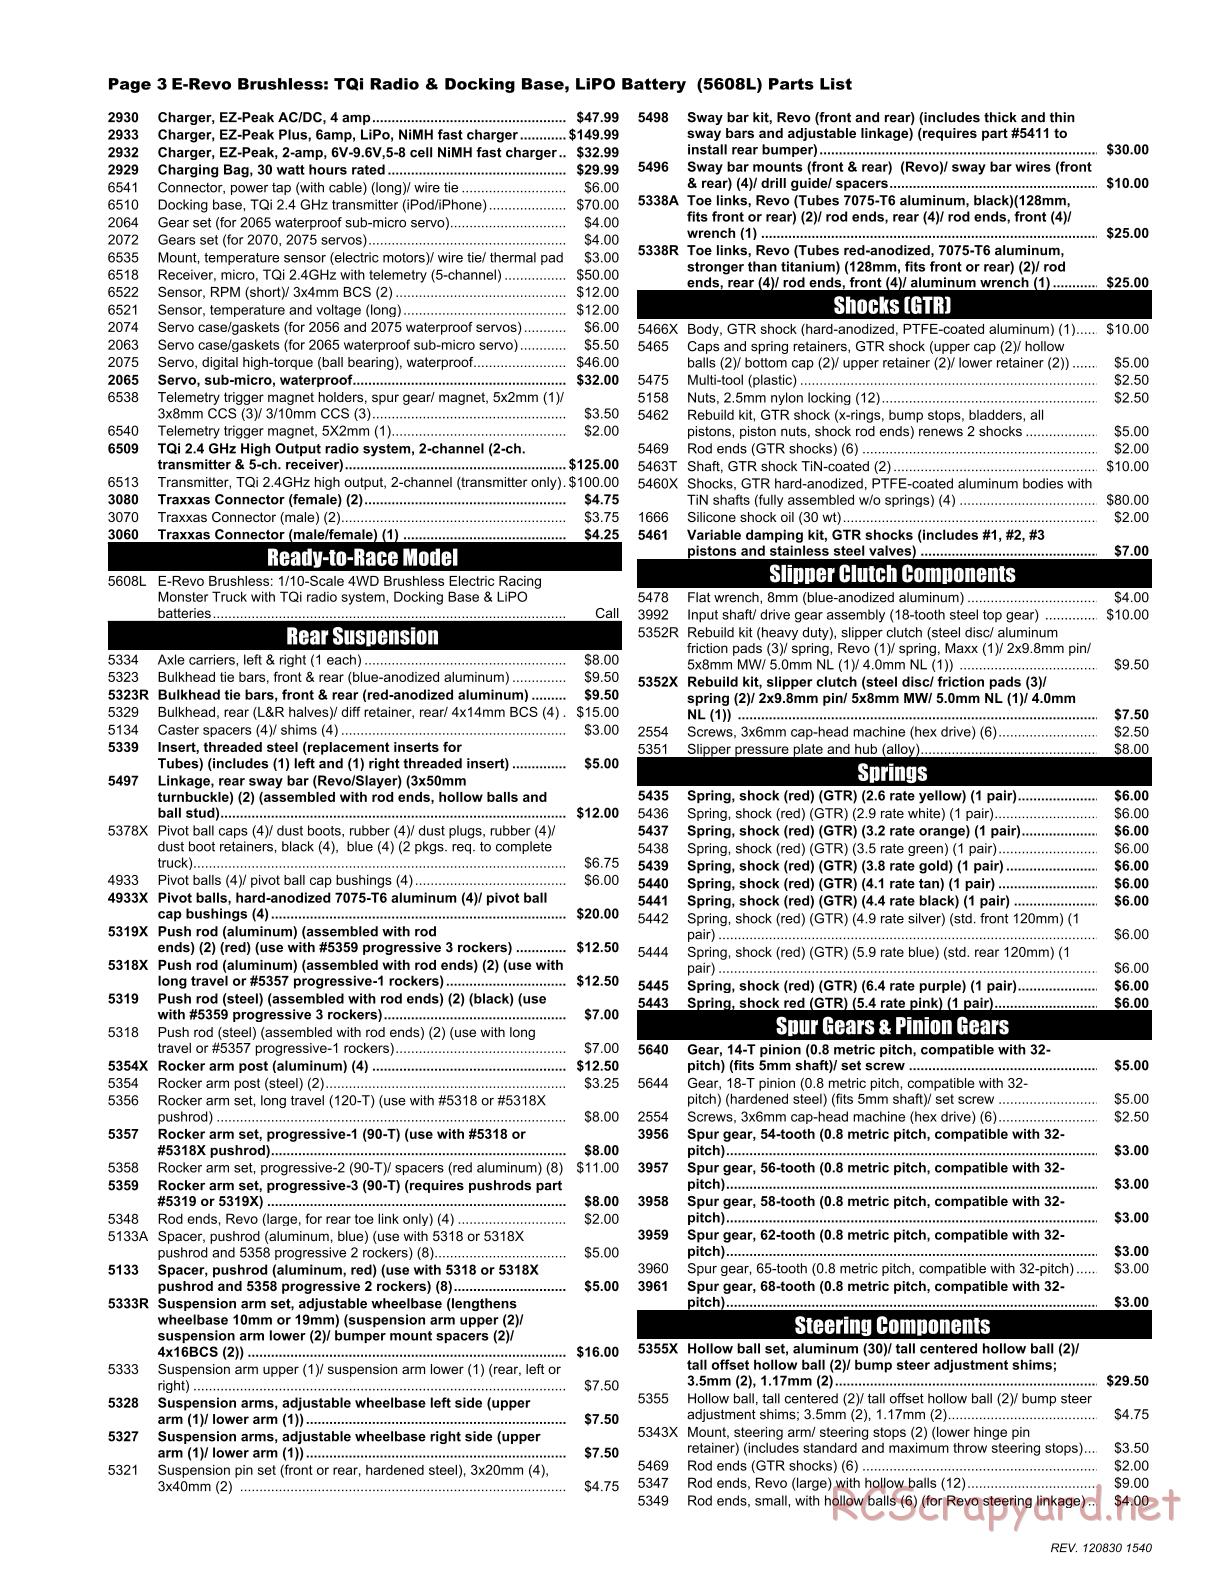 Traxxas - E-Revo Brushless (2012) - Parts List - Page 3